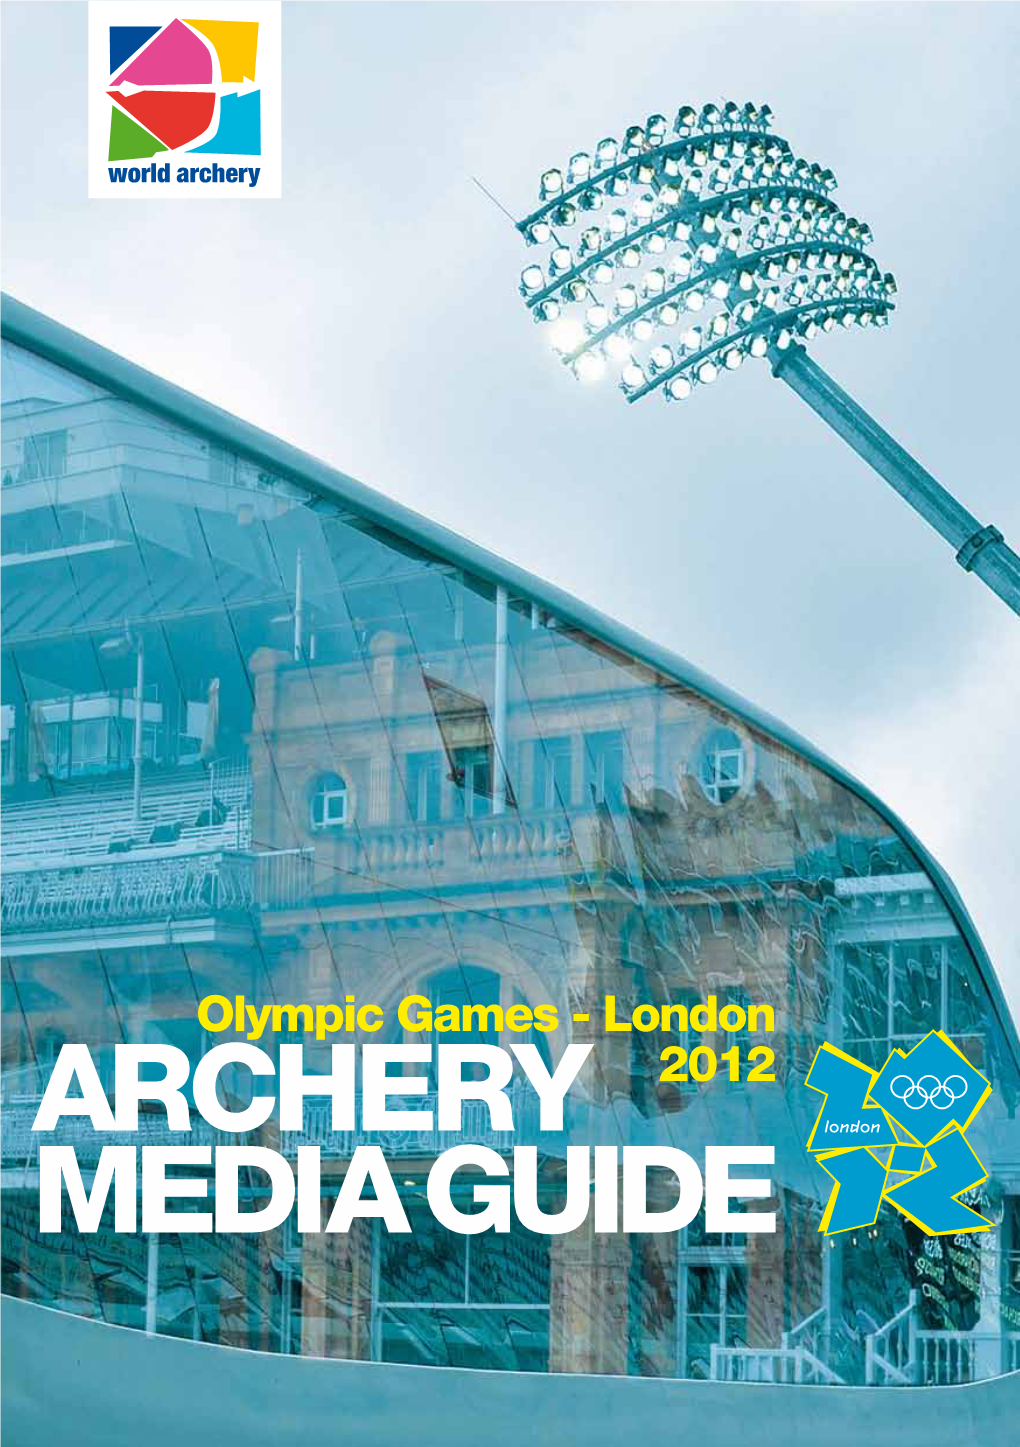 Archery Media Guide London 2012 Olympic Games